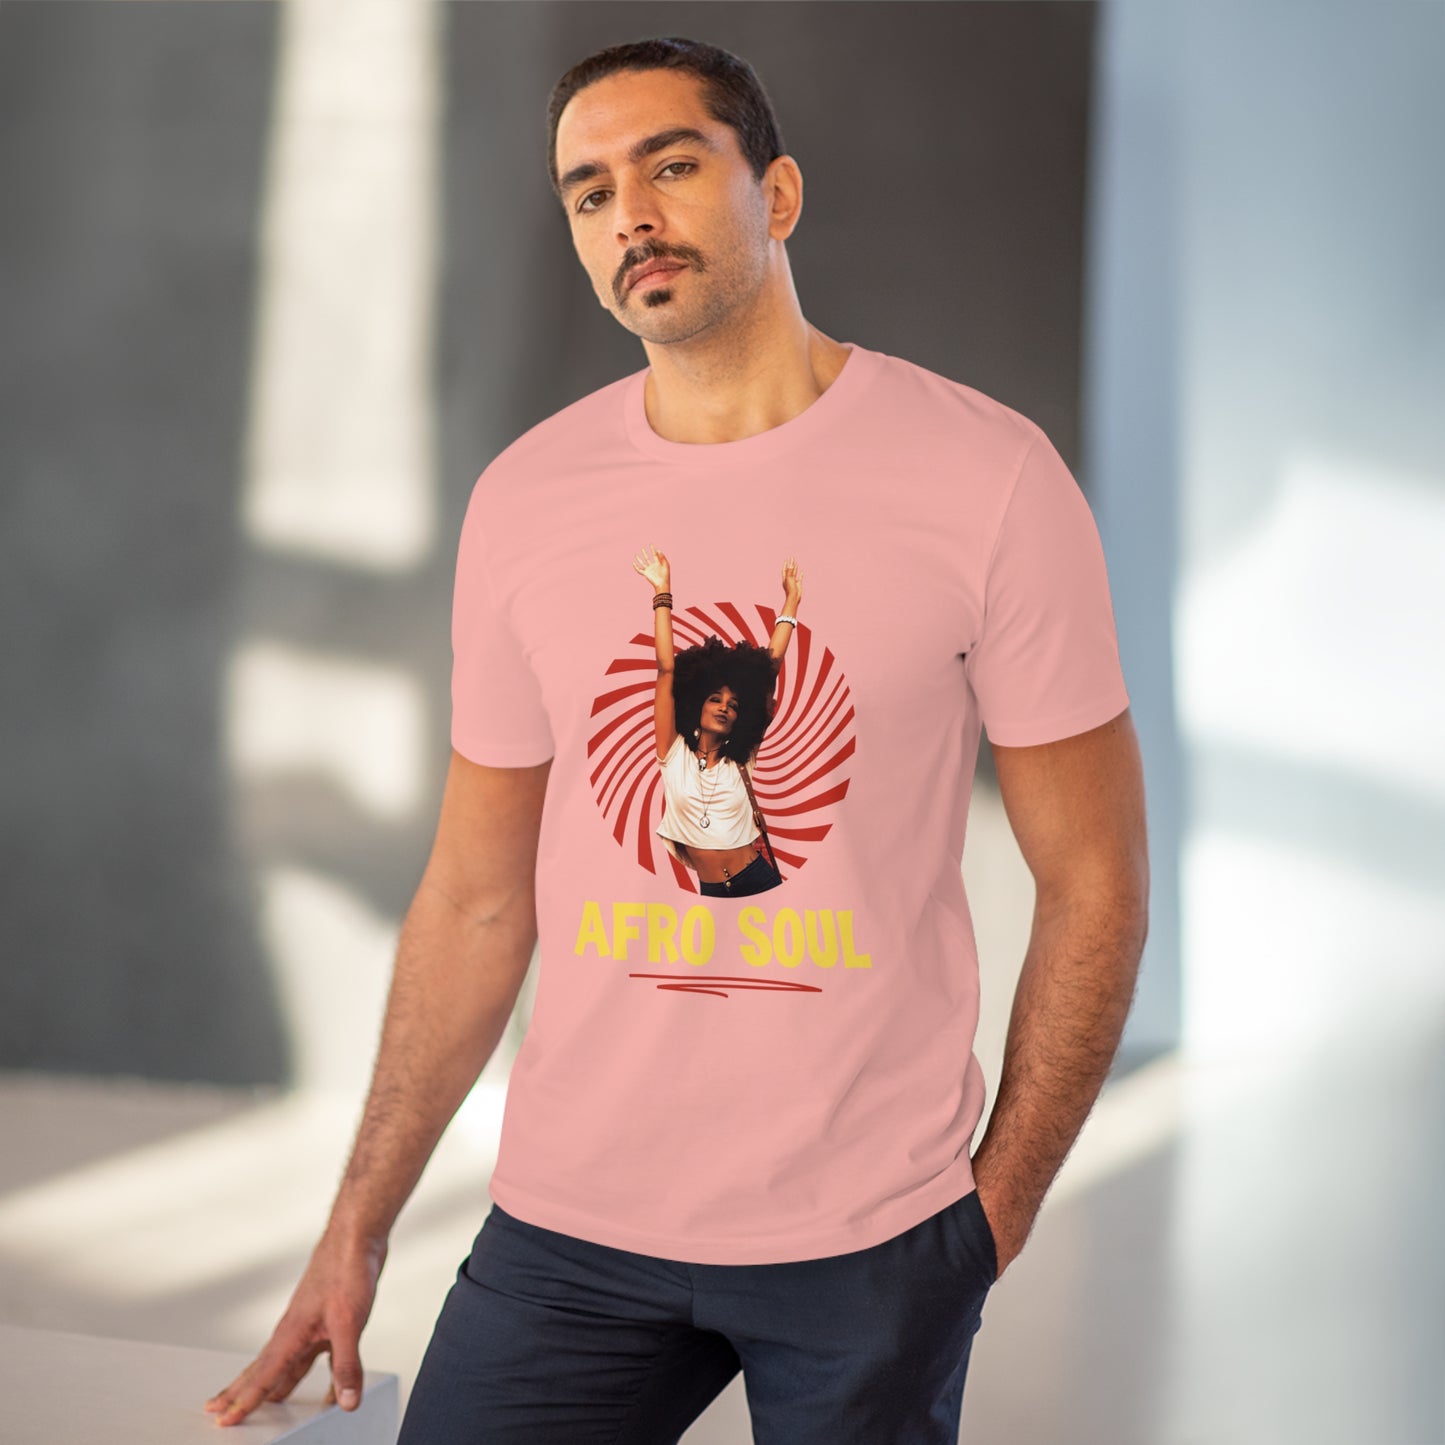 Afro Soul Tee